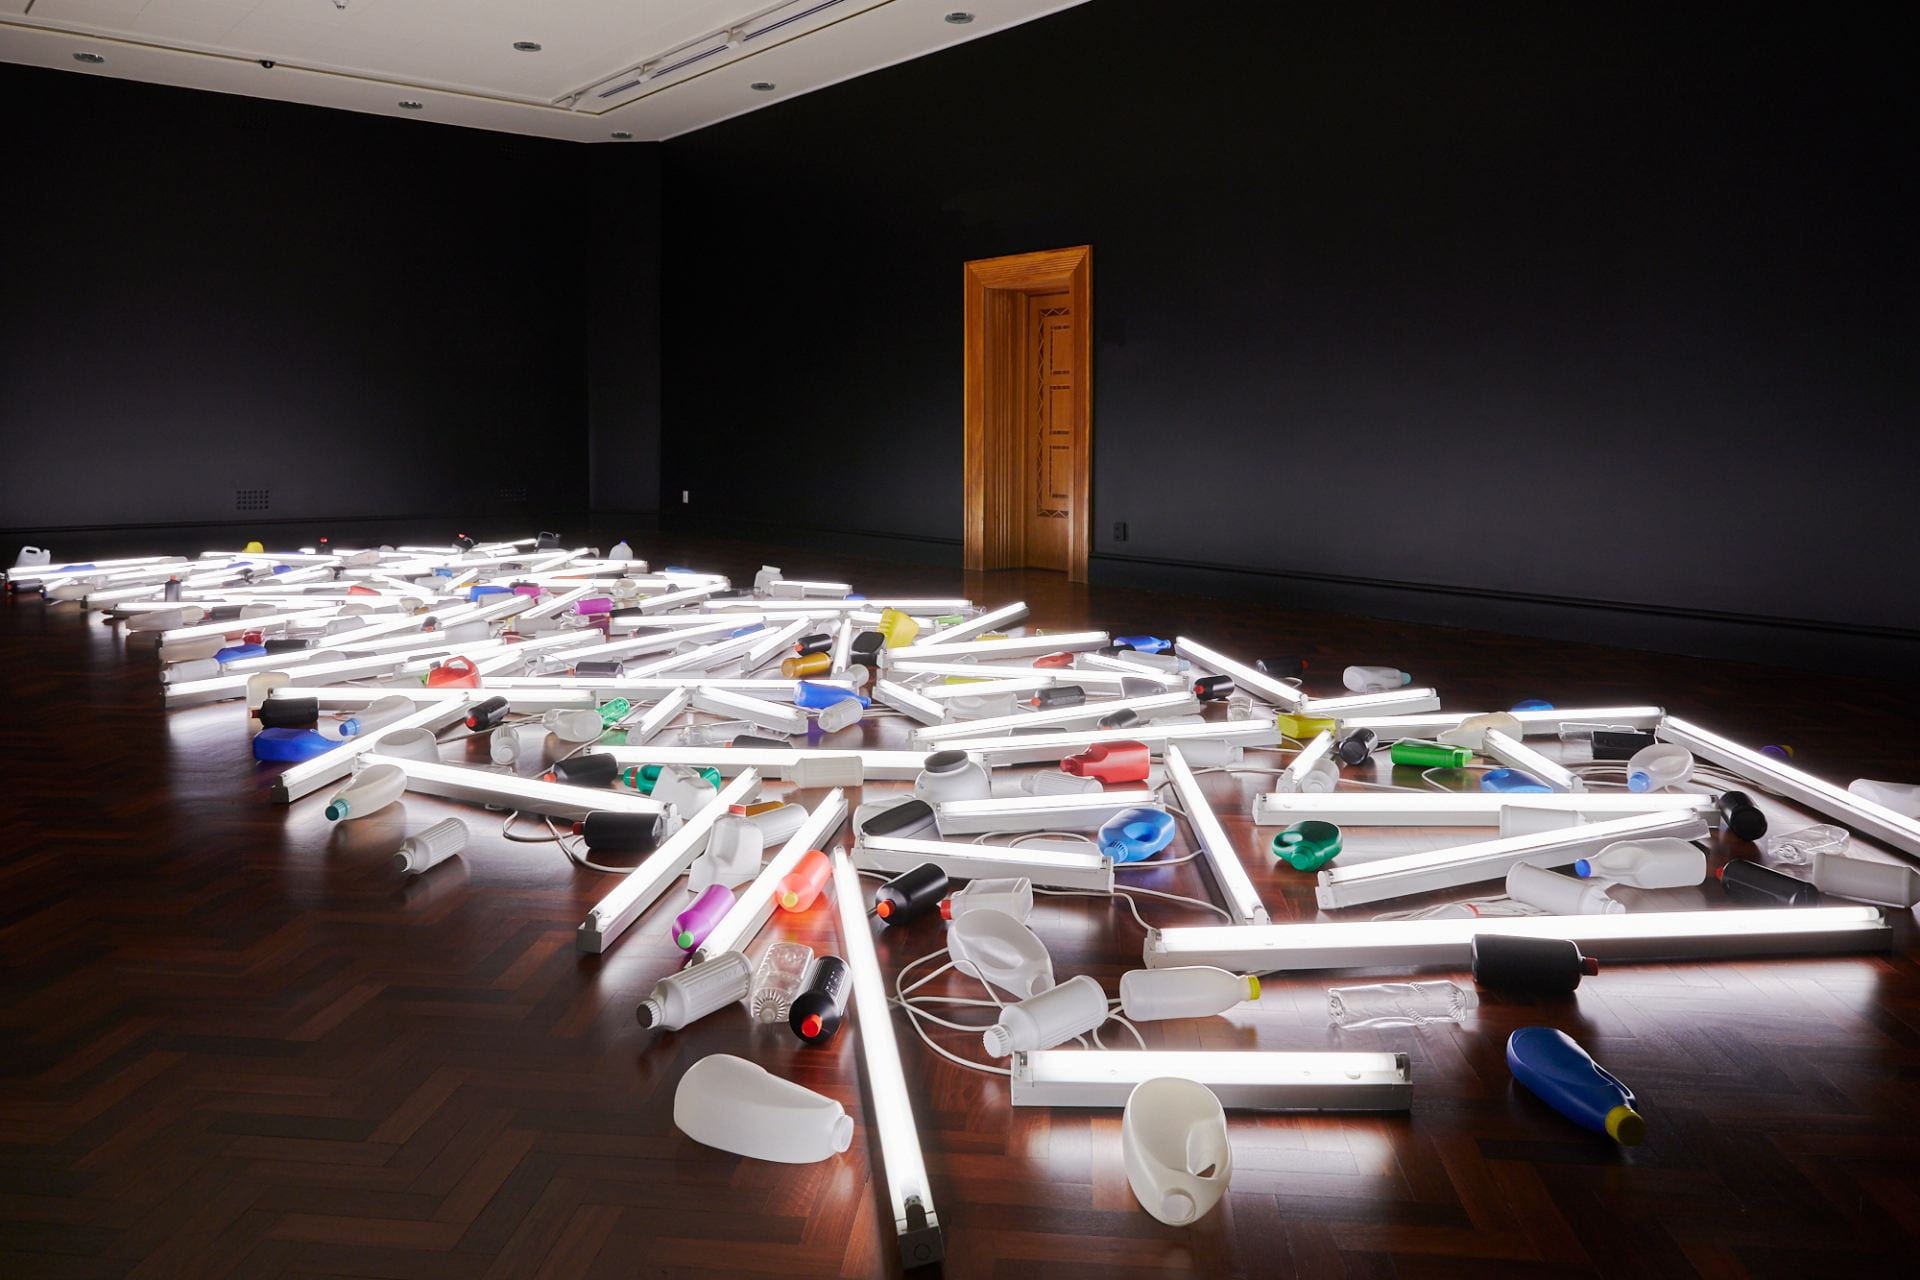 A long, wide assortment of plastic bottles and tubular fluorescent lights are arranged diagonally on a wooden floor, illuminating the room.